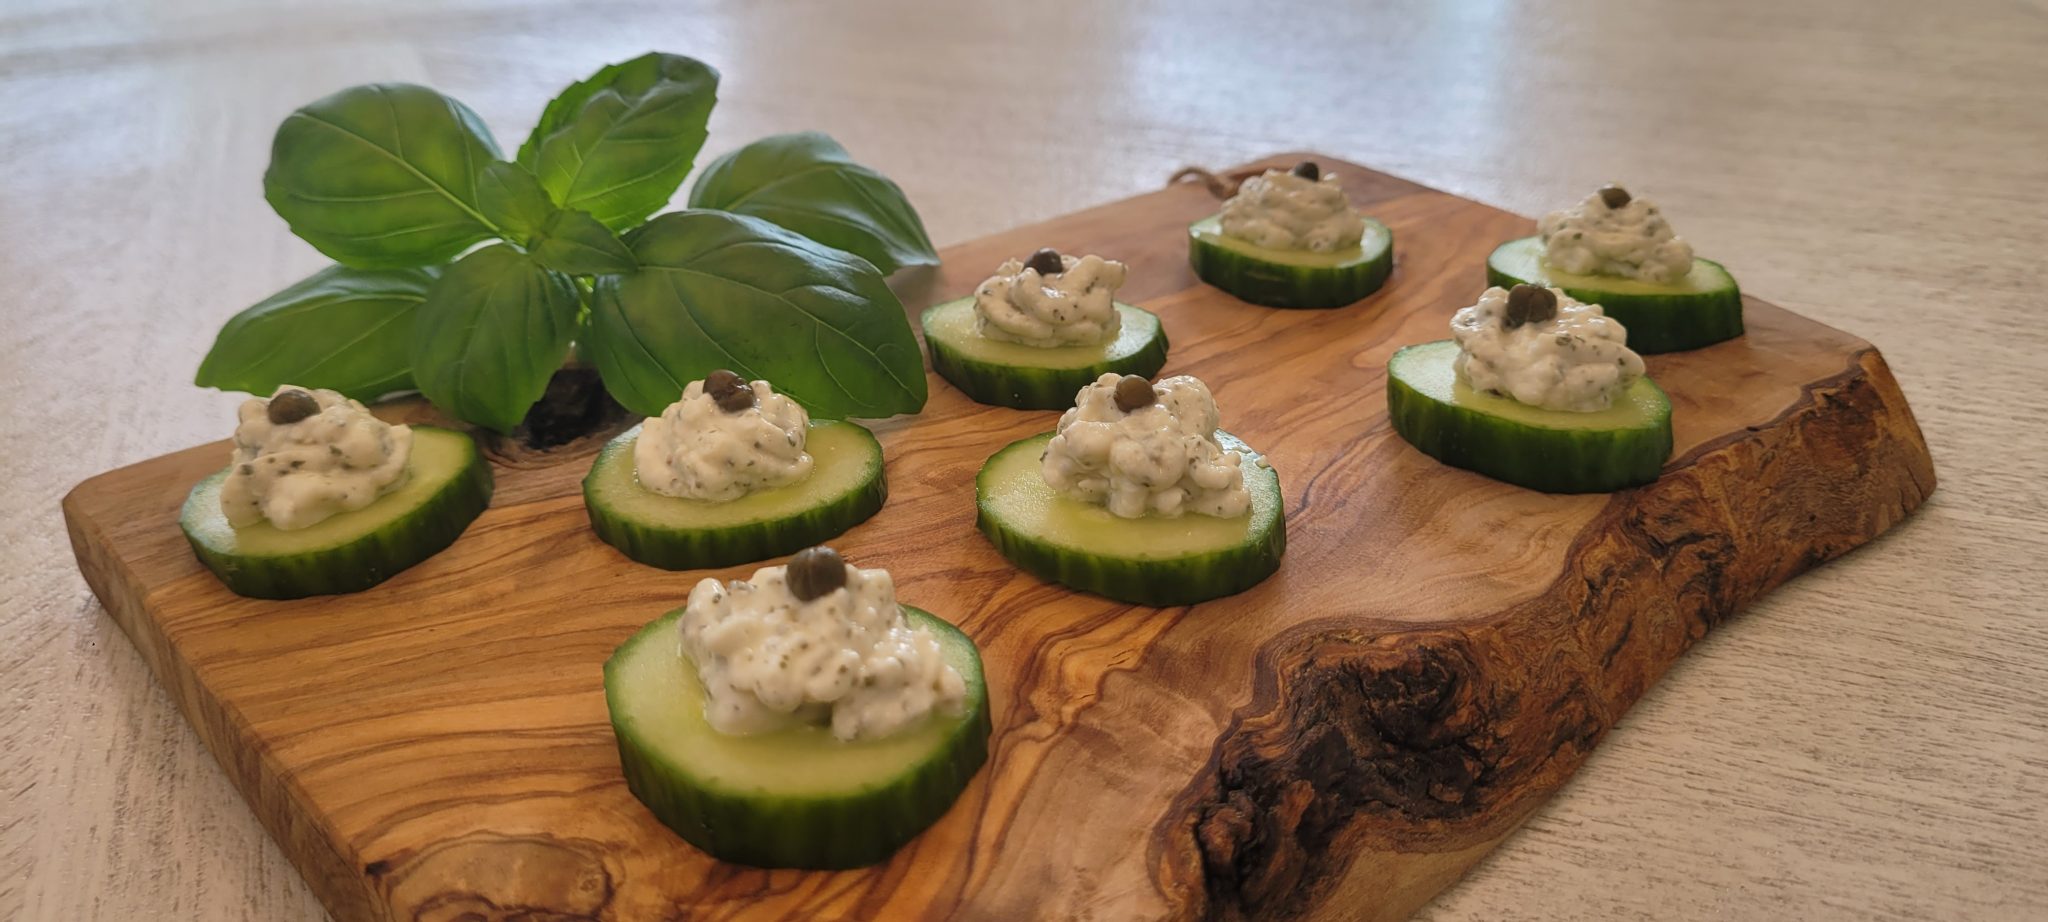 Cucumber bites with cheese and a caper on a wooden board